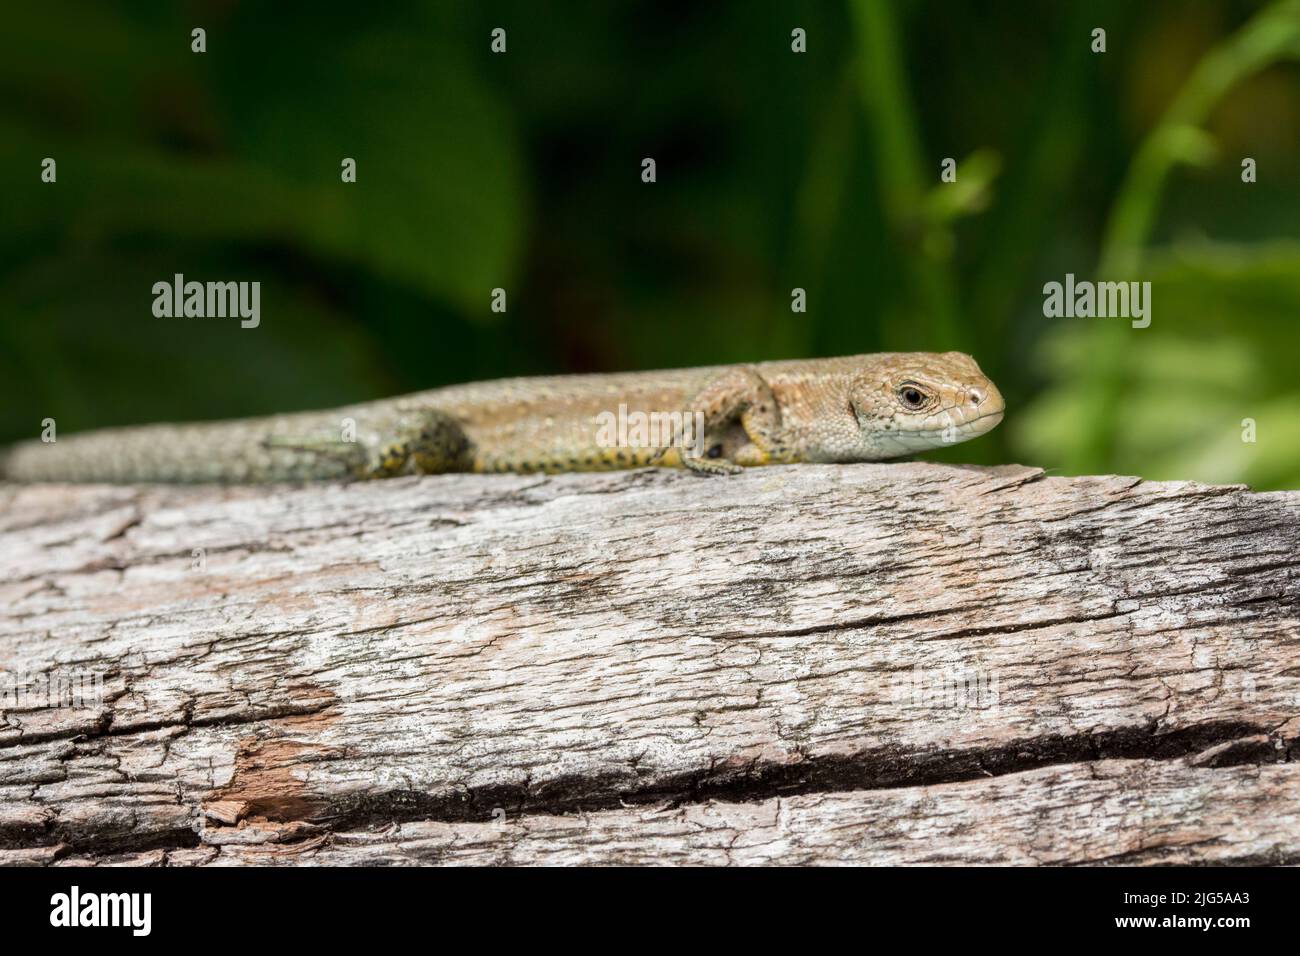 Lizard common (lacerta vivipara) sunbathing on wood, grey brown reptile with a long tail scaly skin, paler underside and throat, and long toes Stock Photo